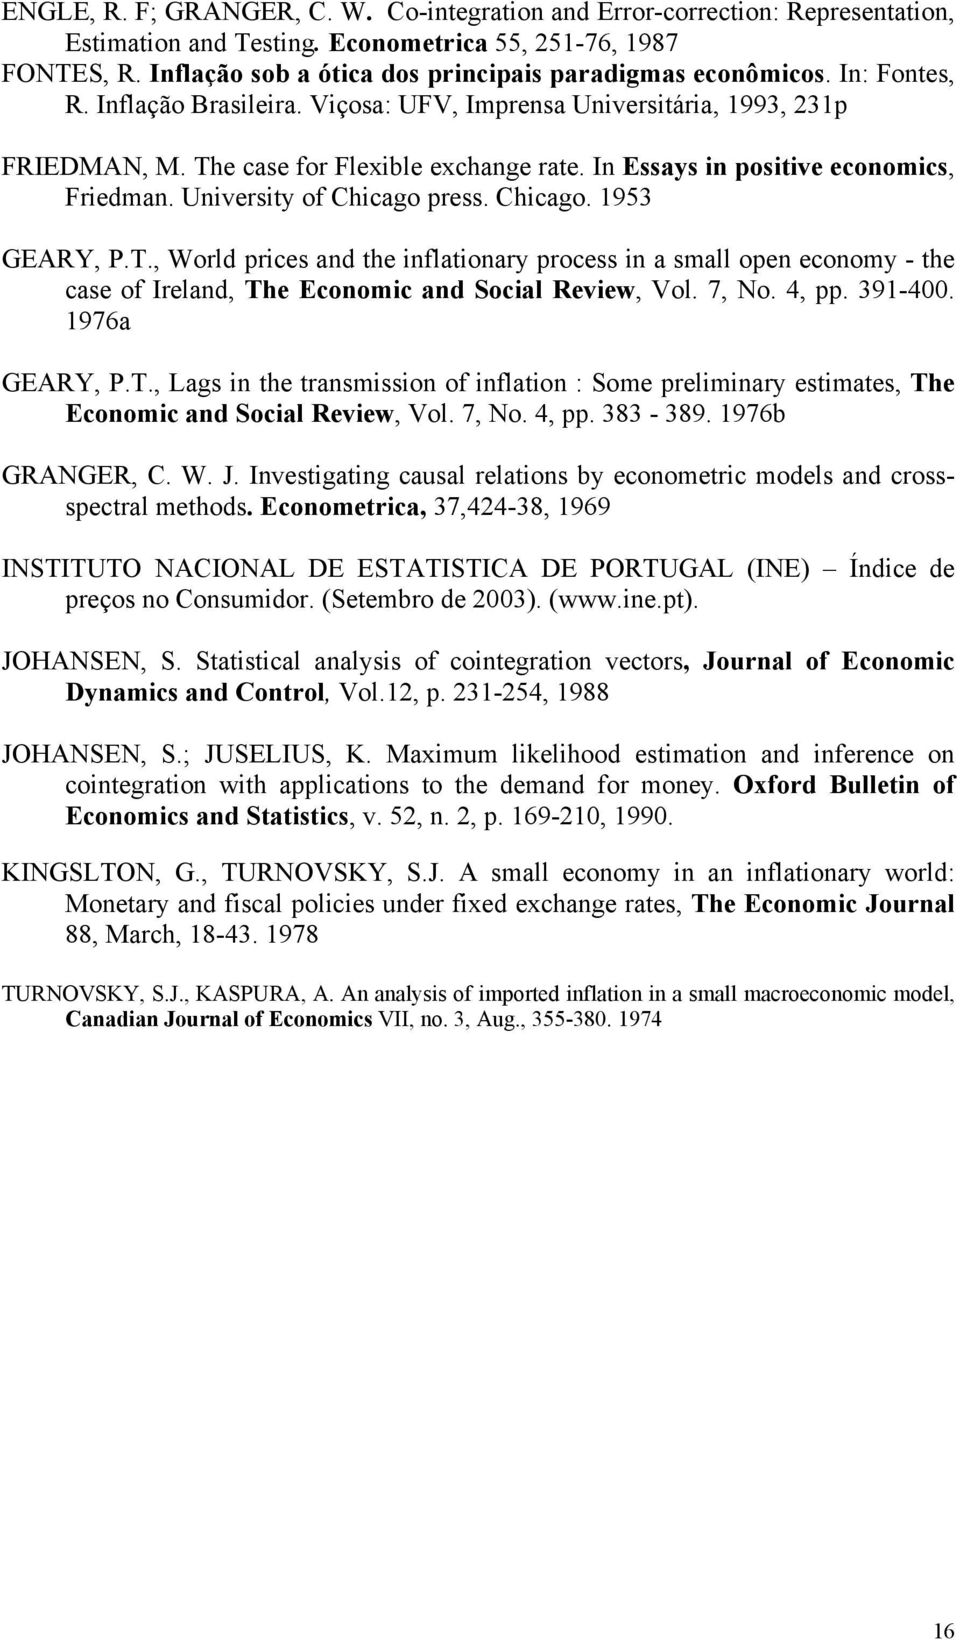 T., World prces and the nflatonary process n a small open economy - the case of Ireland, The Economc and Socal Revew, Vol. 7, No. 4, pp. 39-400. 976a GEARY, P.T., Lags n the transmsson of nflaton : Some prelmnary estmates, The Economc and Socal Revew, Vol.